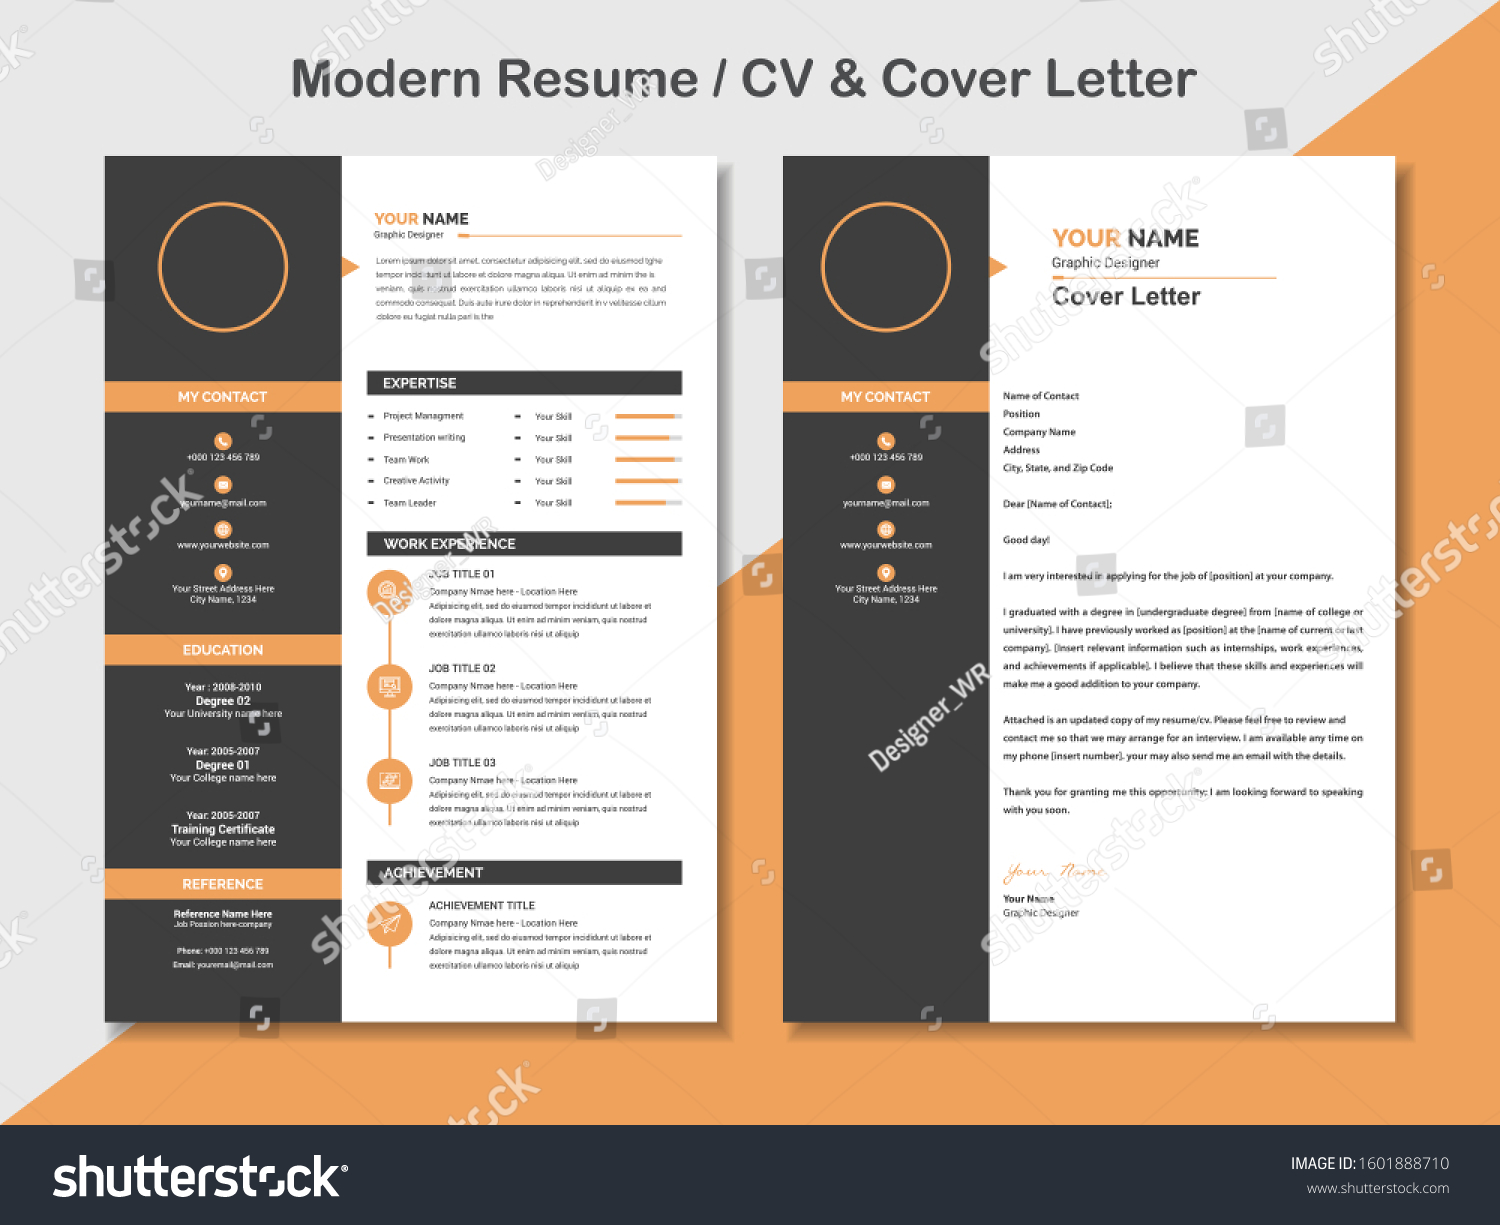 Here's A Quick Way To Solve A Problem with resume